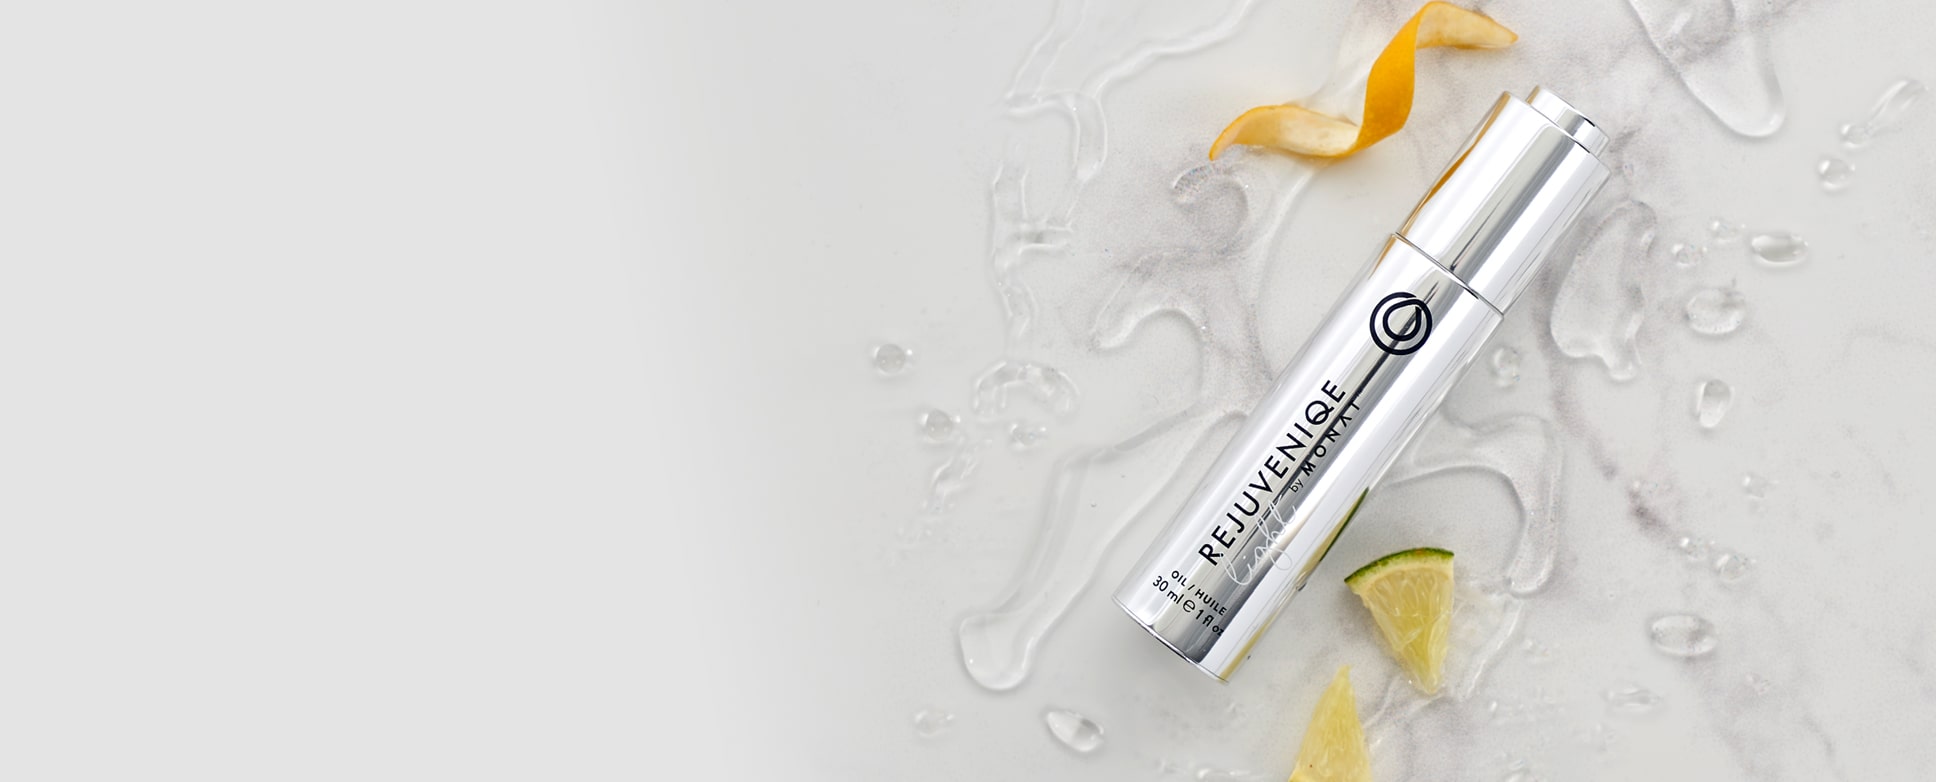 REJUVENIQE® laying on a flat surface, along with ingredients such as lemon and lime slices 